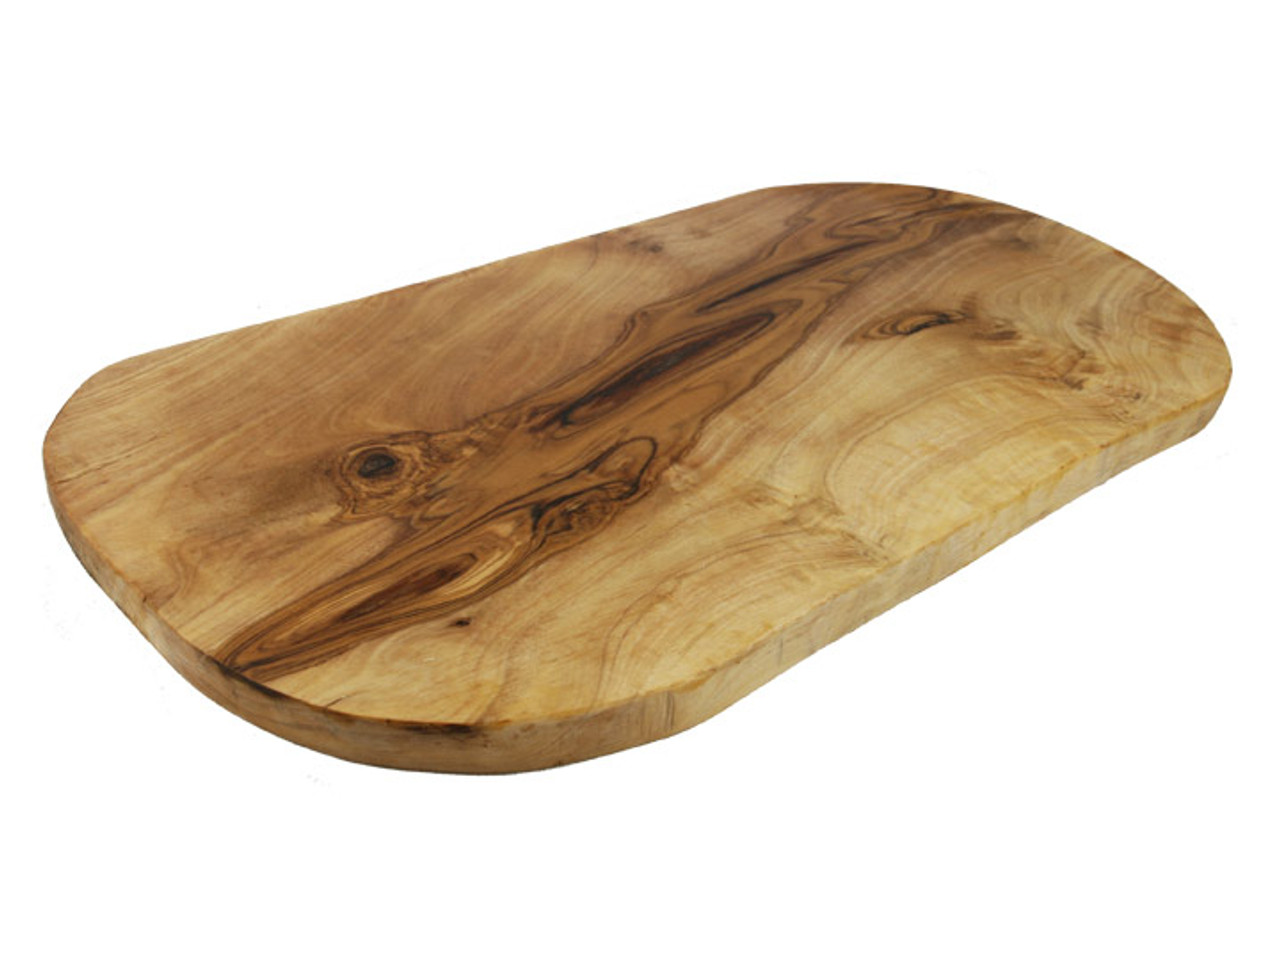 Handcrafted Small Teak Wood Cutting Board in Light Brown, 'Home Flavors